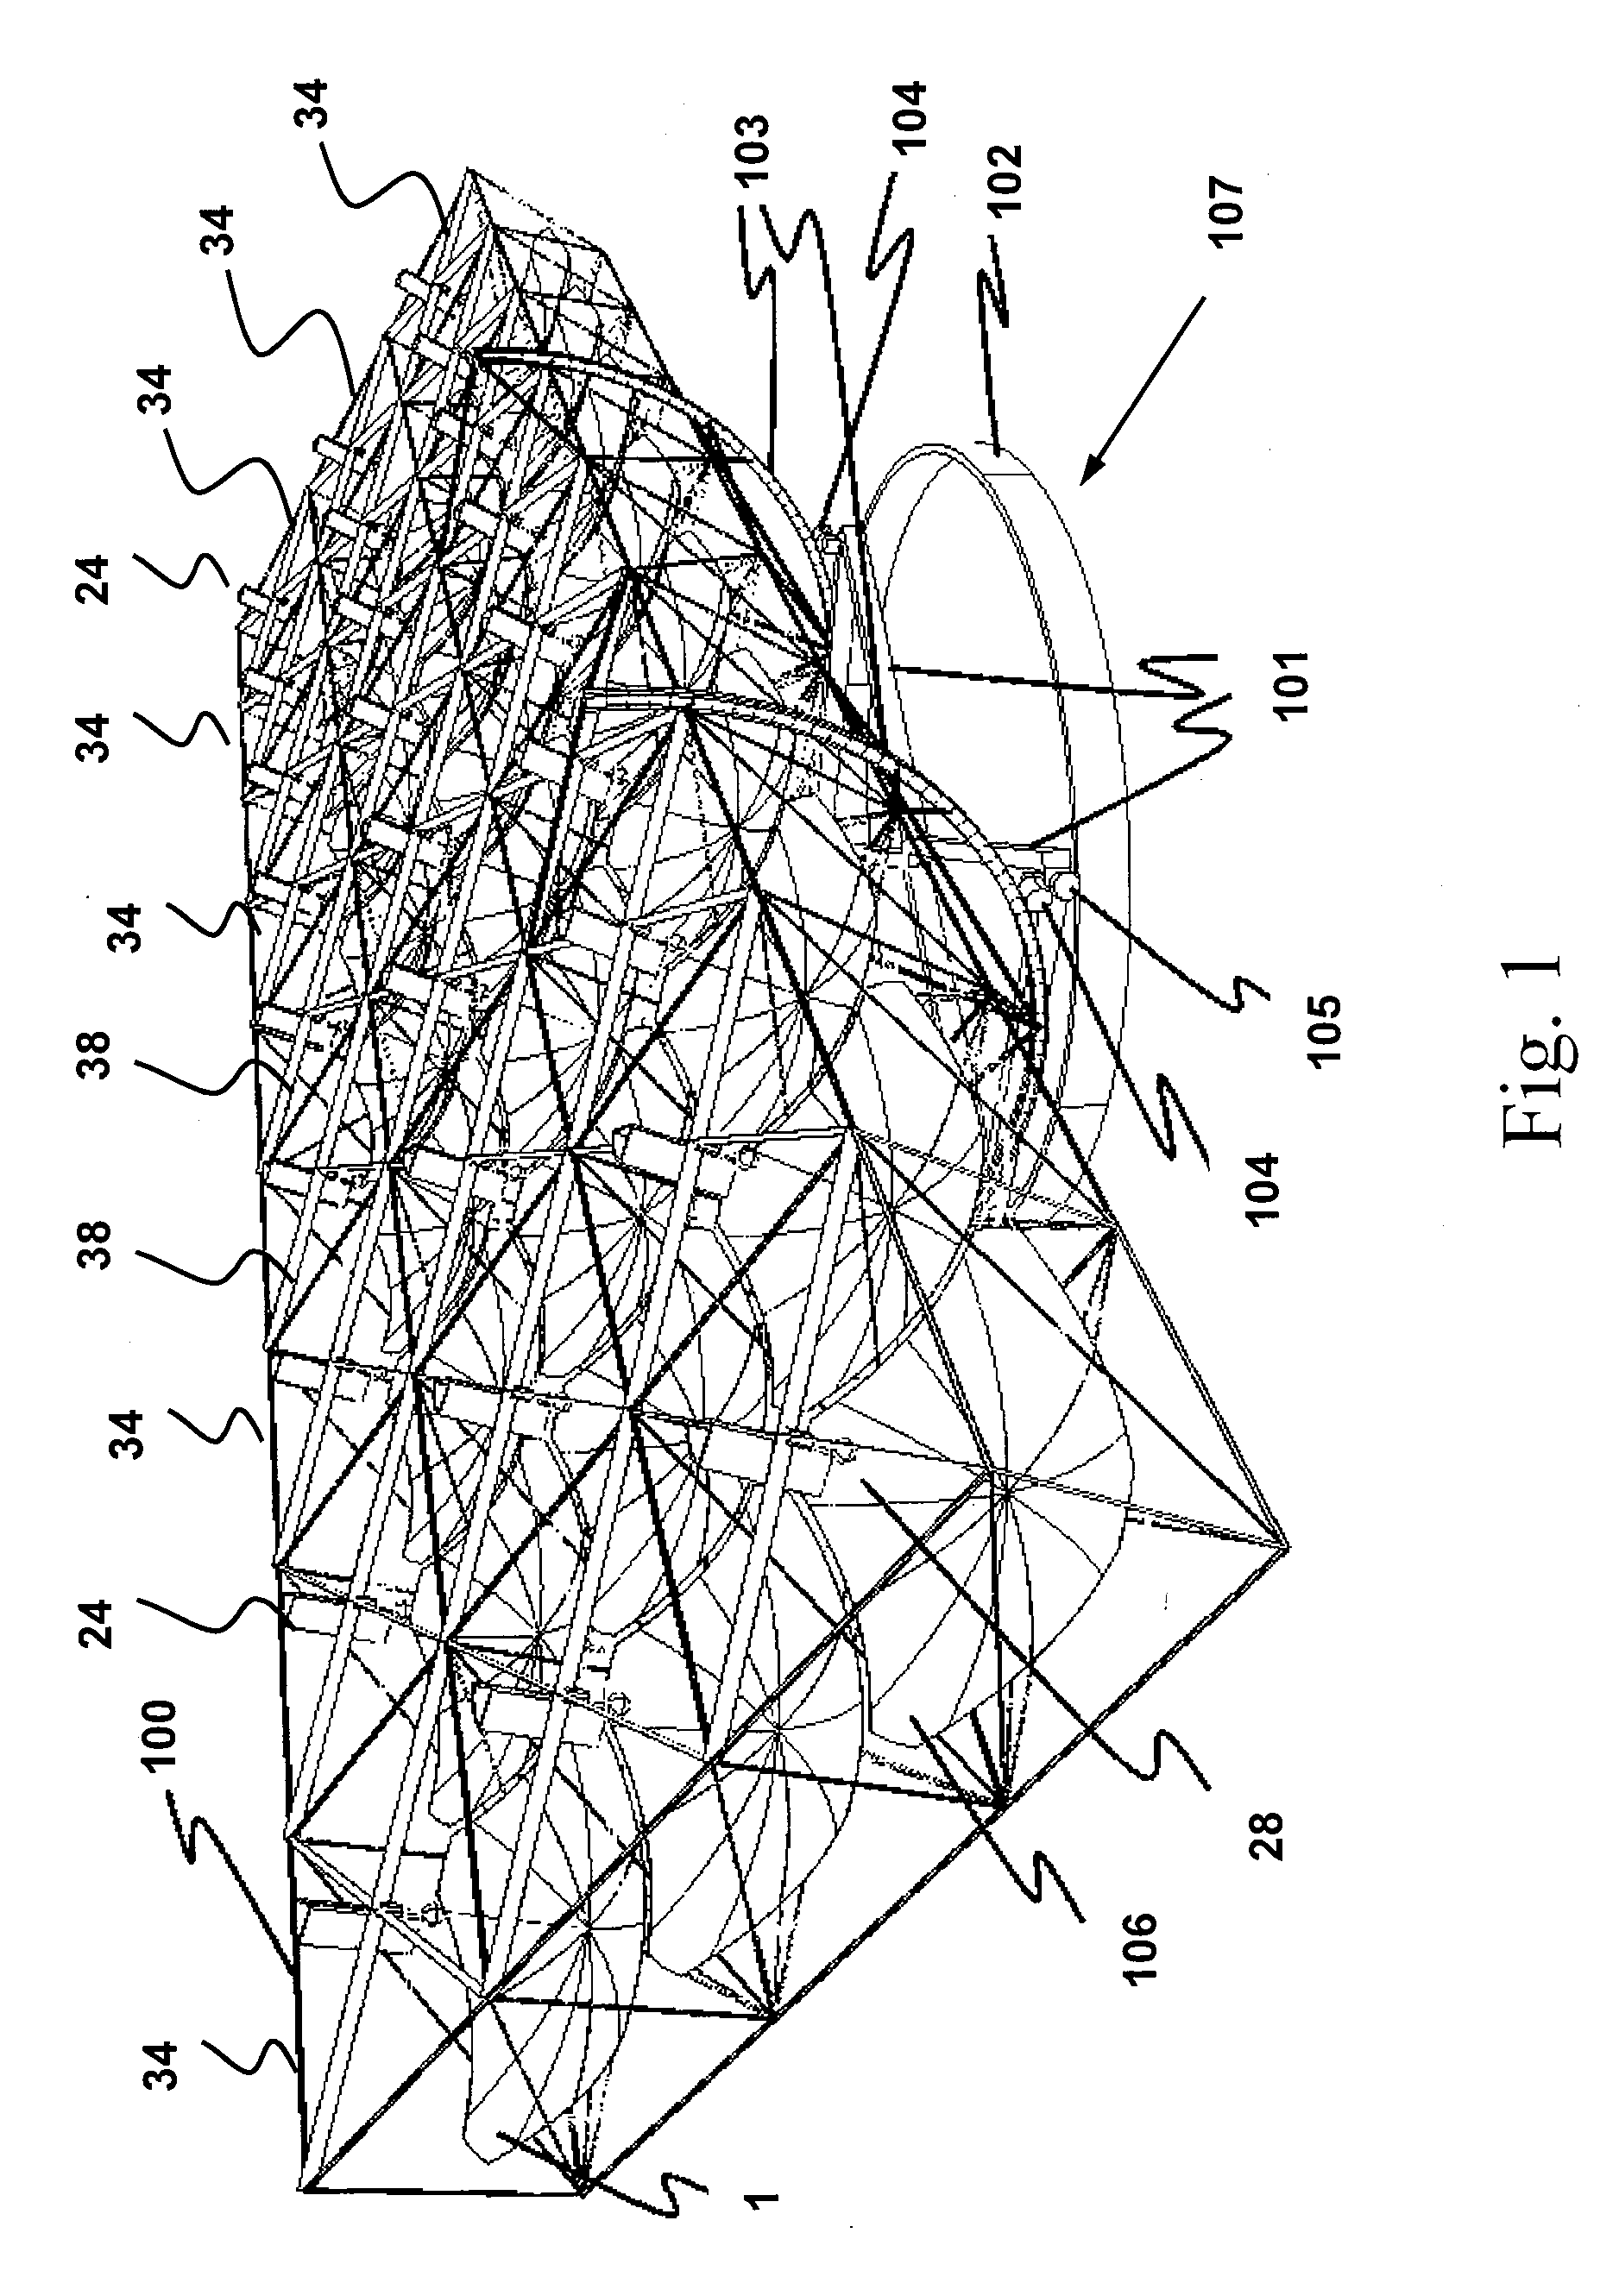 Method of manufacturing large dish reflectors for a solar concentrator apparatus